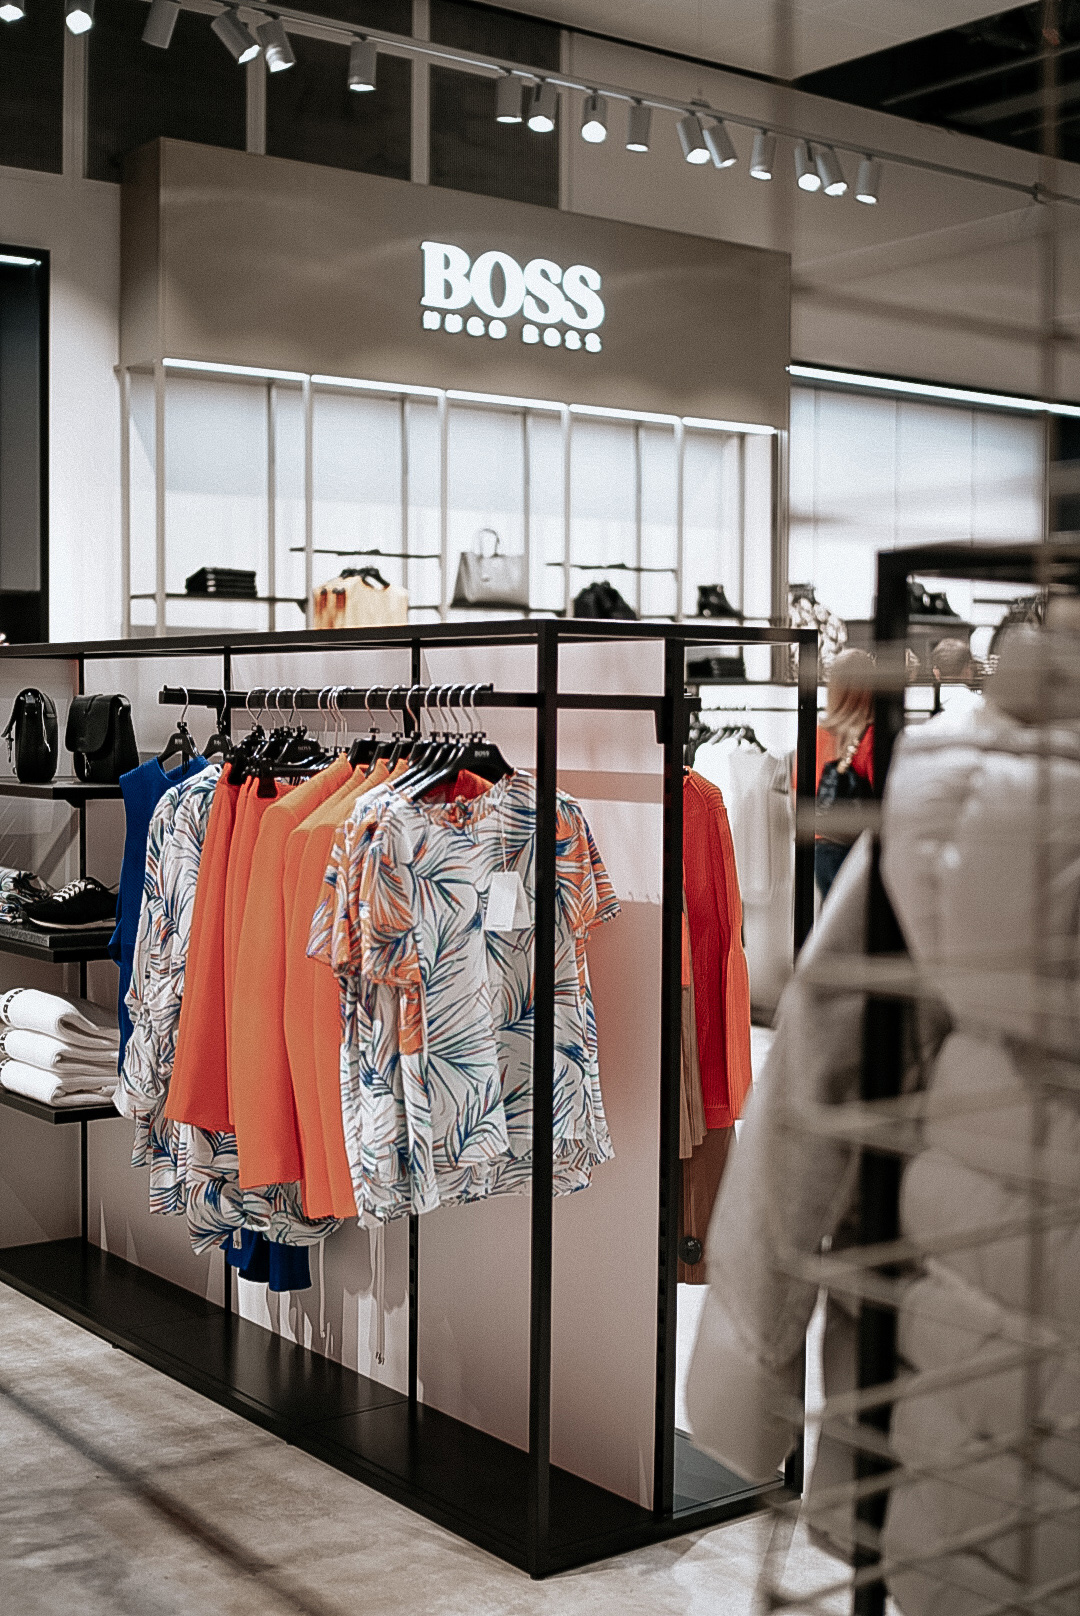 hugo boss outlet harbour town